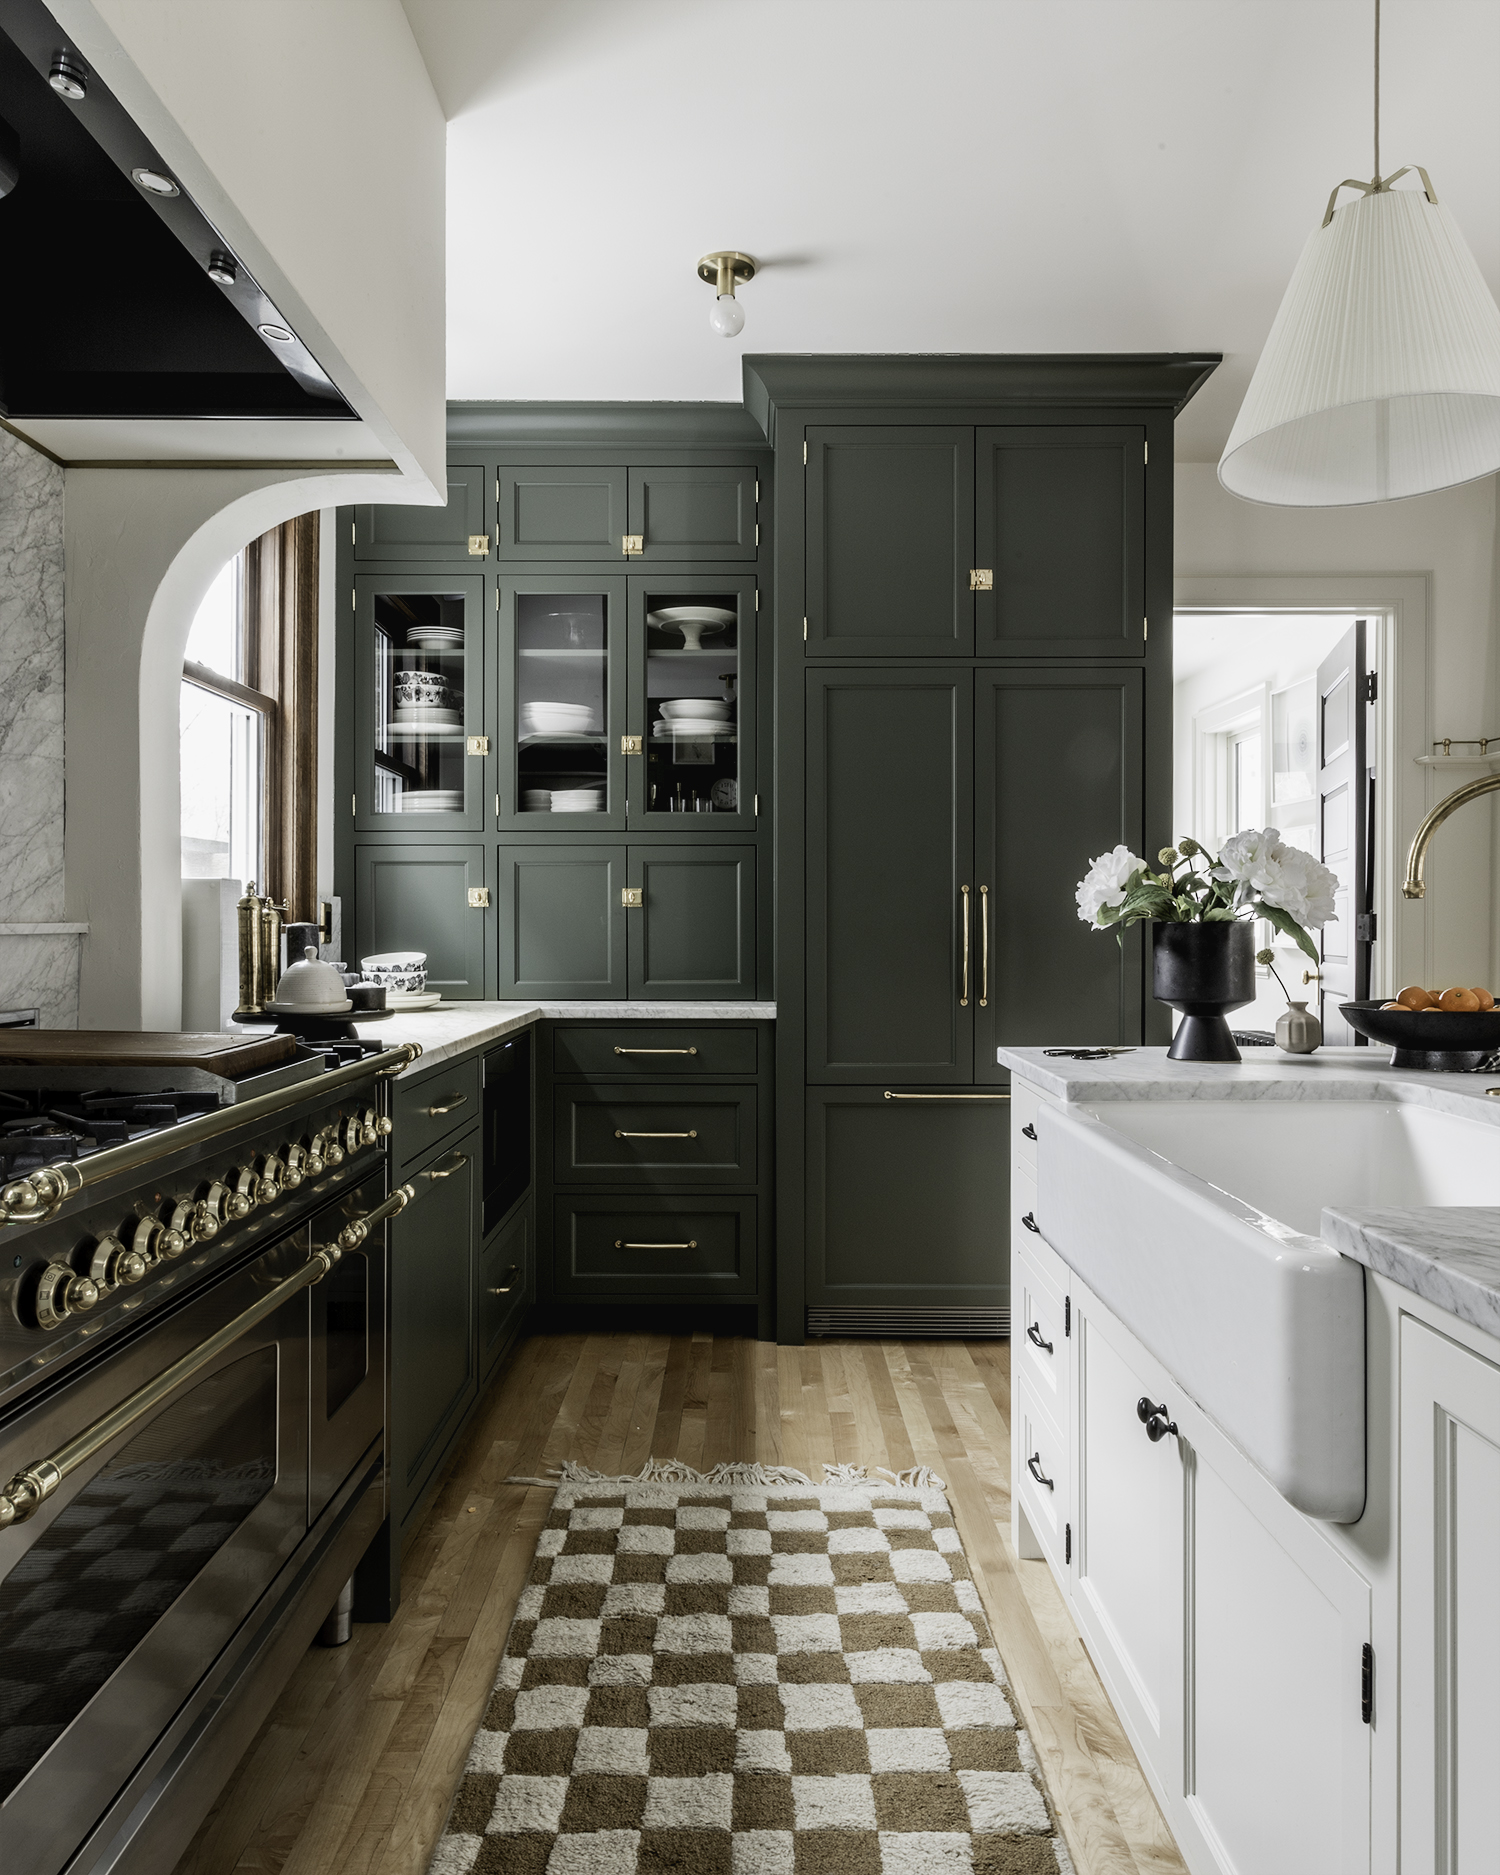 Historic Kitchen Renovation in Minneapolis with Green Cabinets